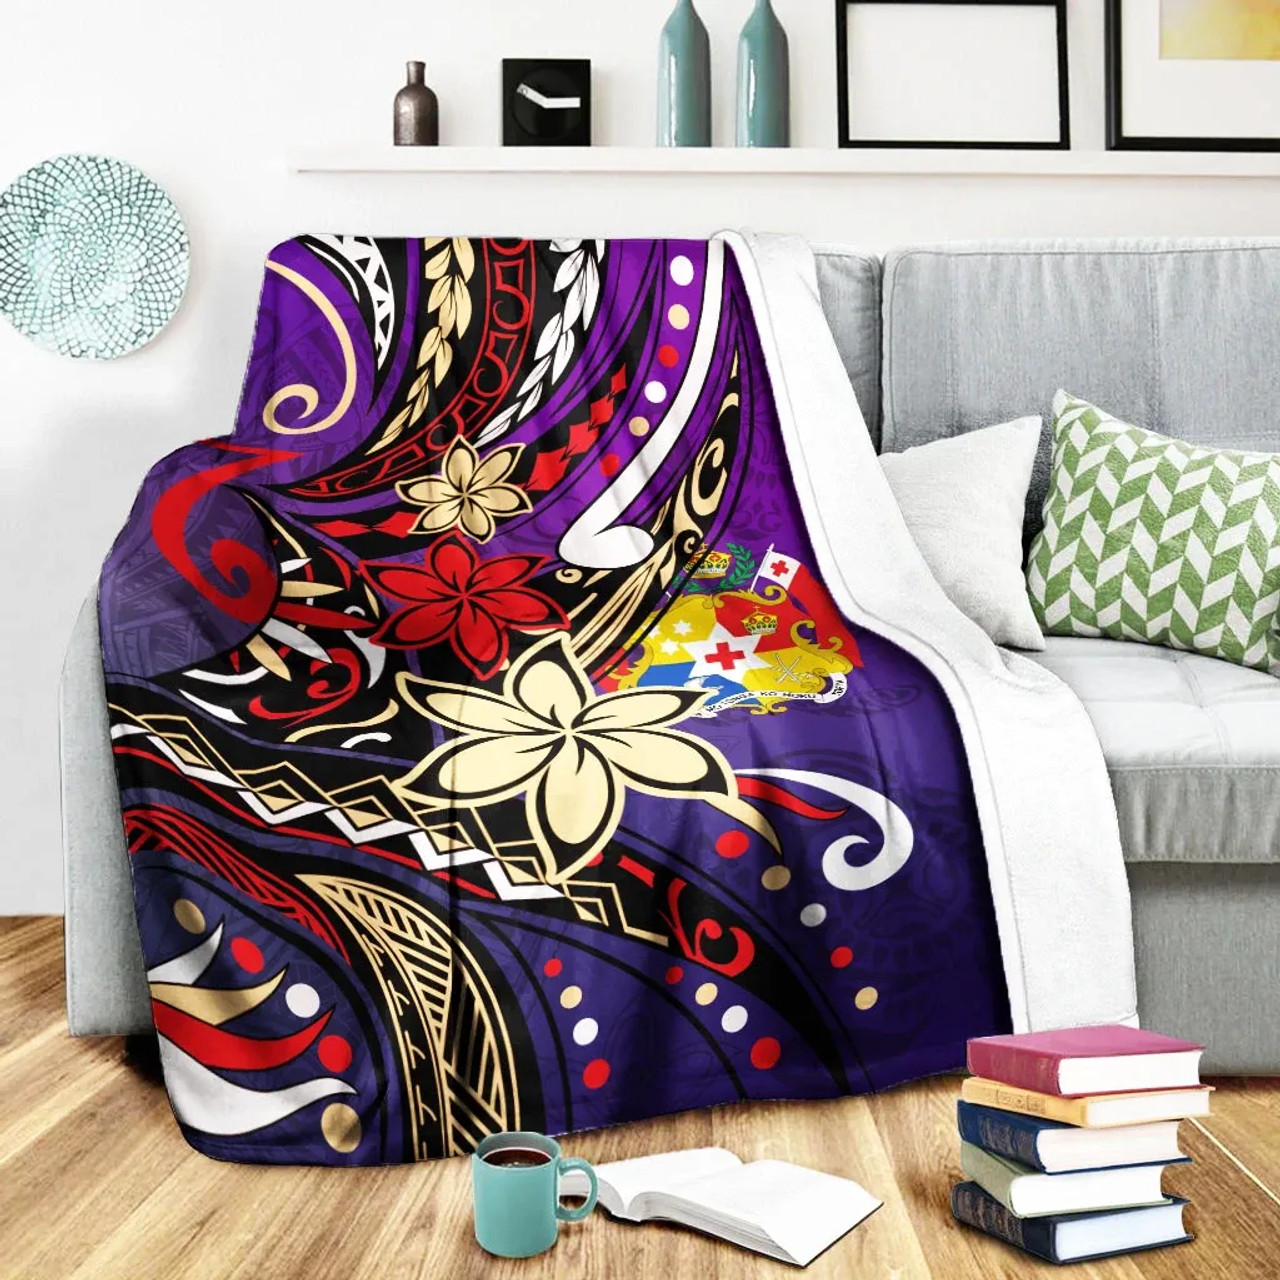 Tonga Premium Blanket - Tribal Flower With Special Turtles Purple Color 3